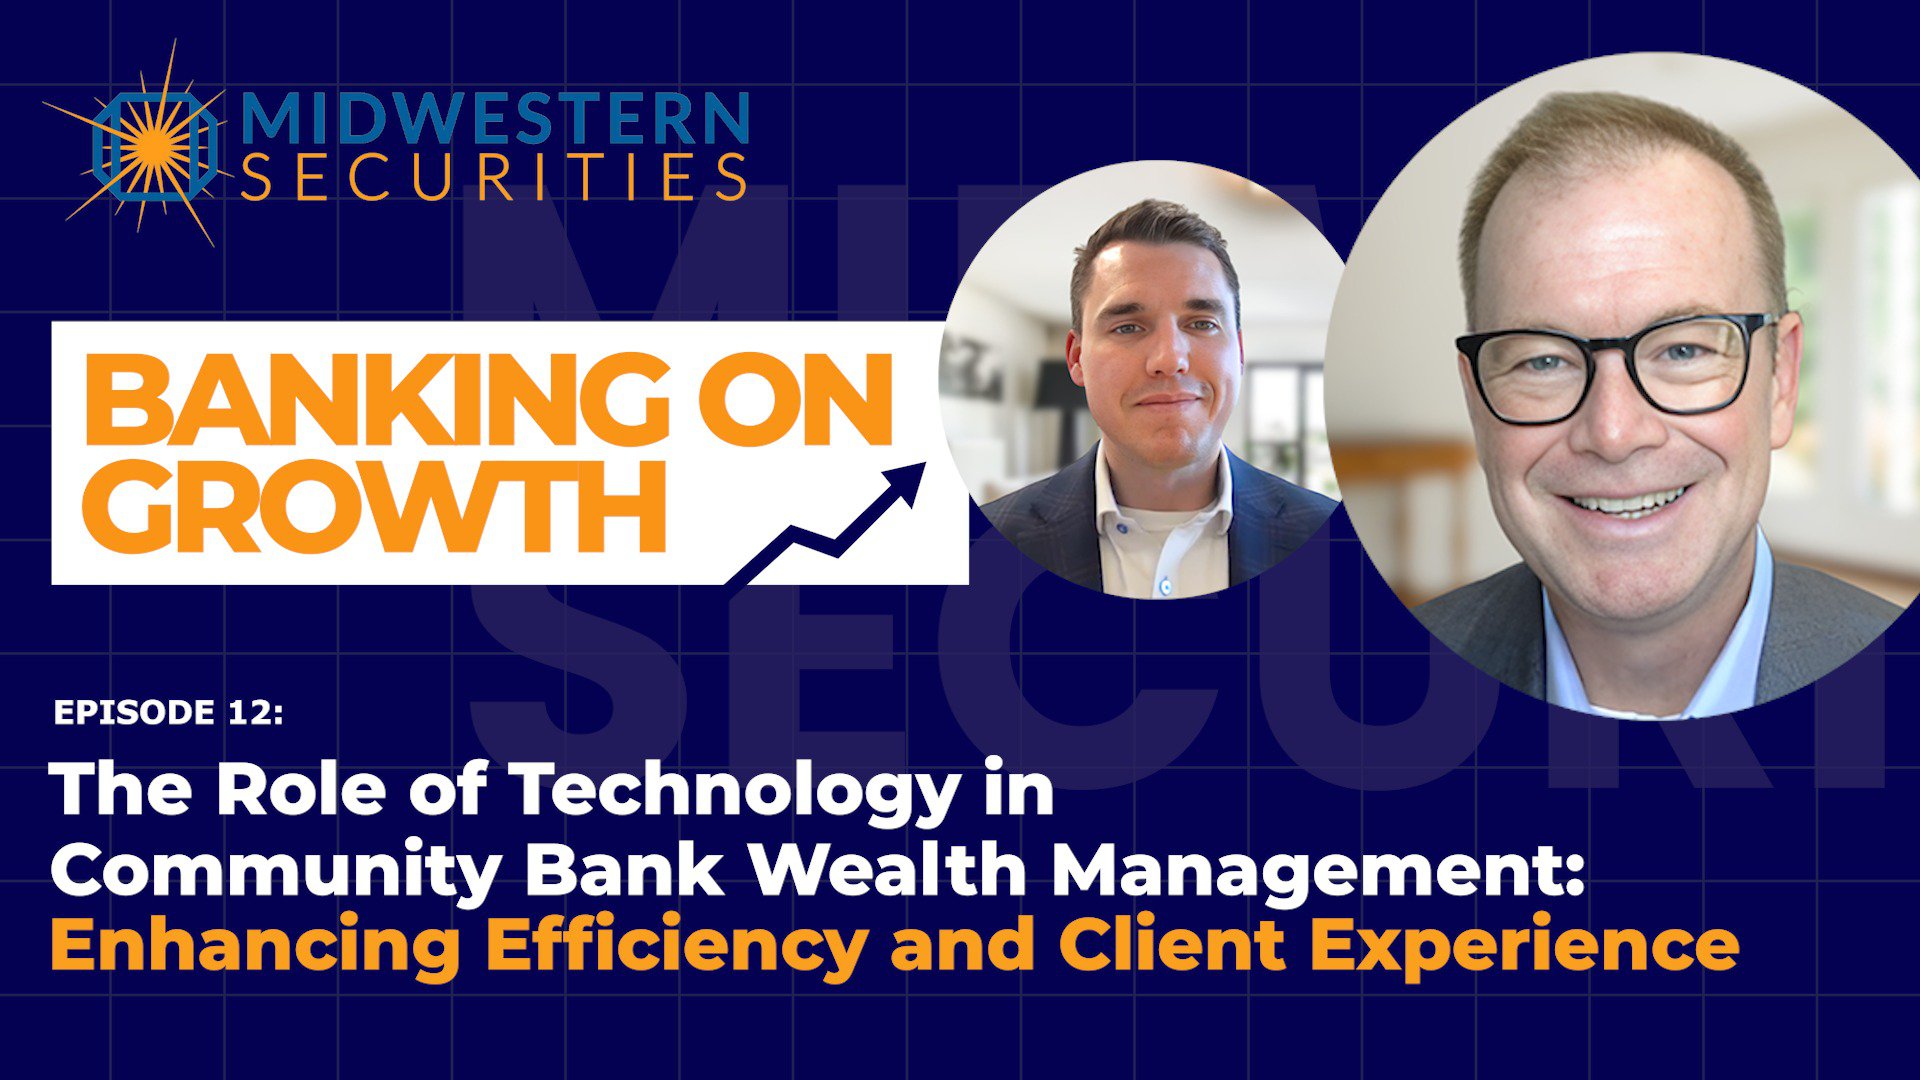 The Role of Technology in Community Bank Wealth Management: Enhancing Efficiency and Client Experience